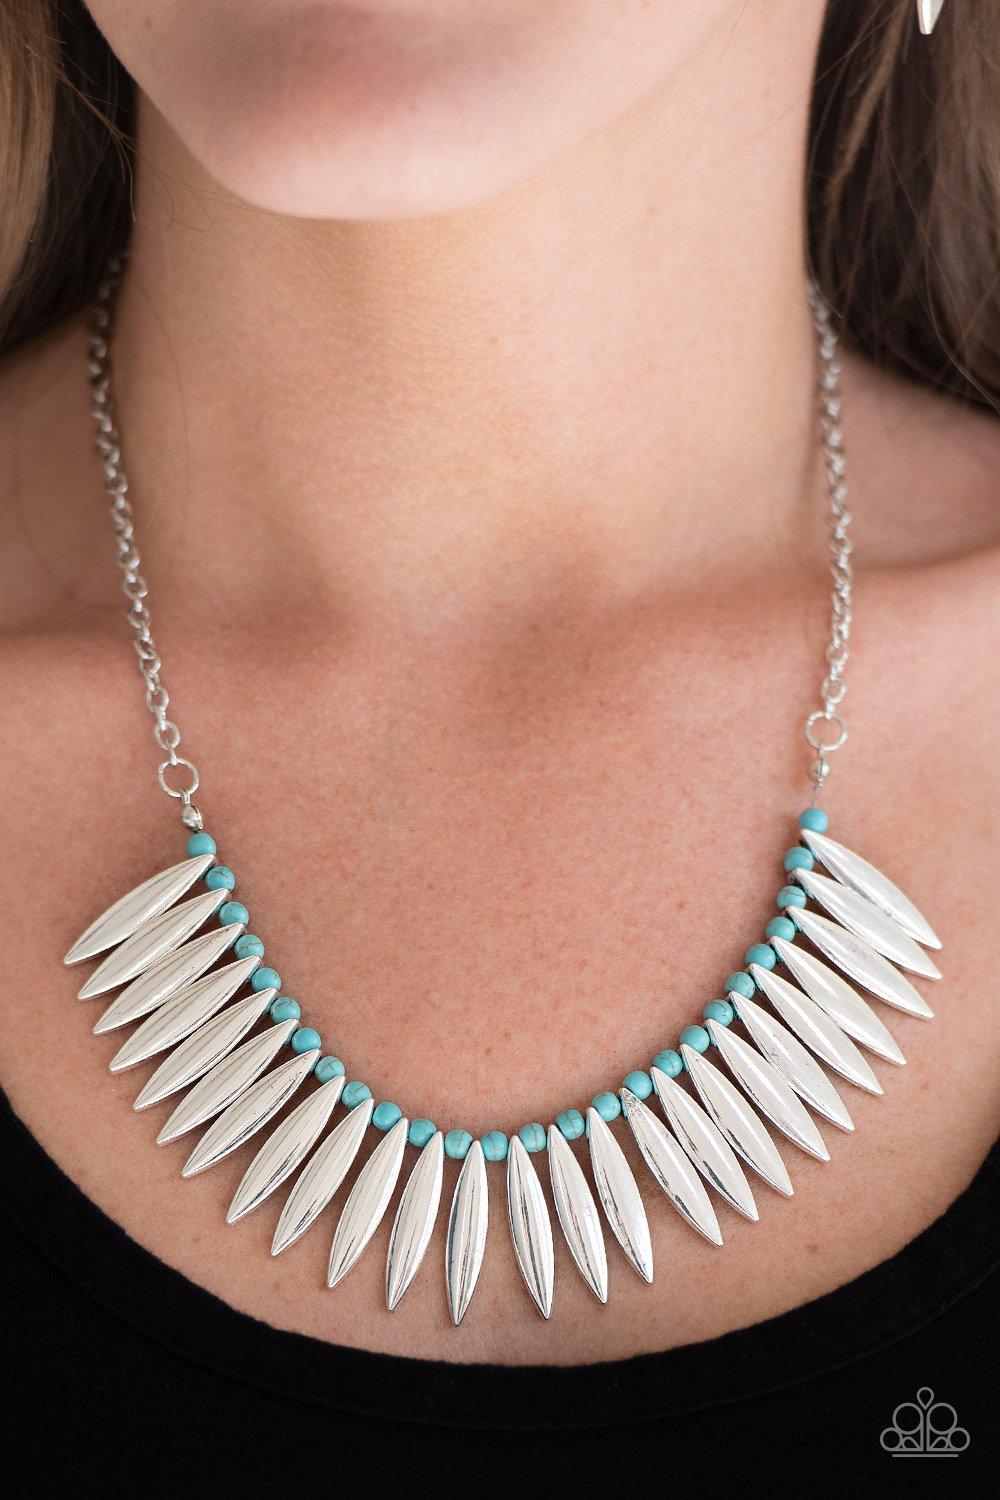 Tameless Tigress Silver and Turquoise Blue Necklace - Paparazzi Accessories-CarasShop.com - $5 Jewelry by Cara Jewels